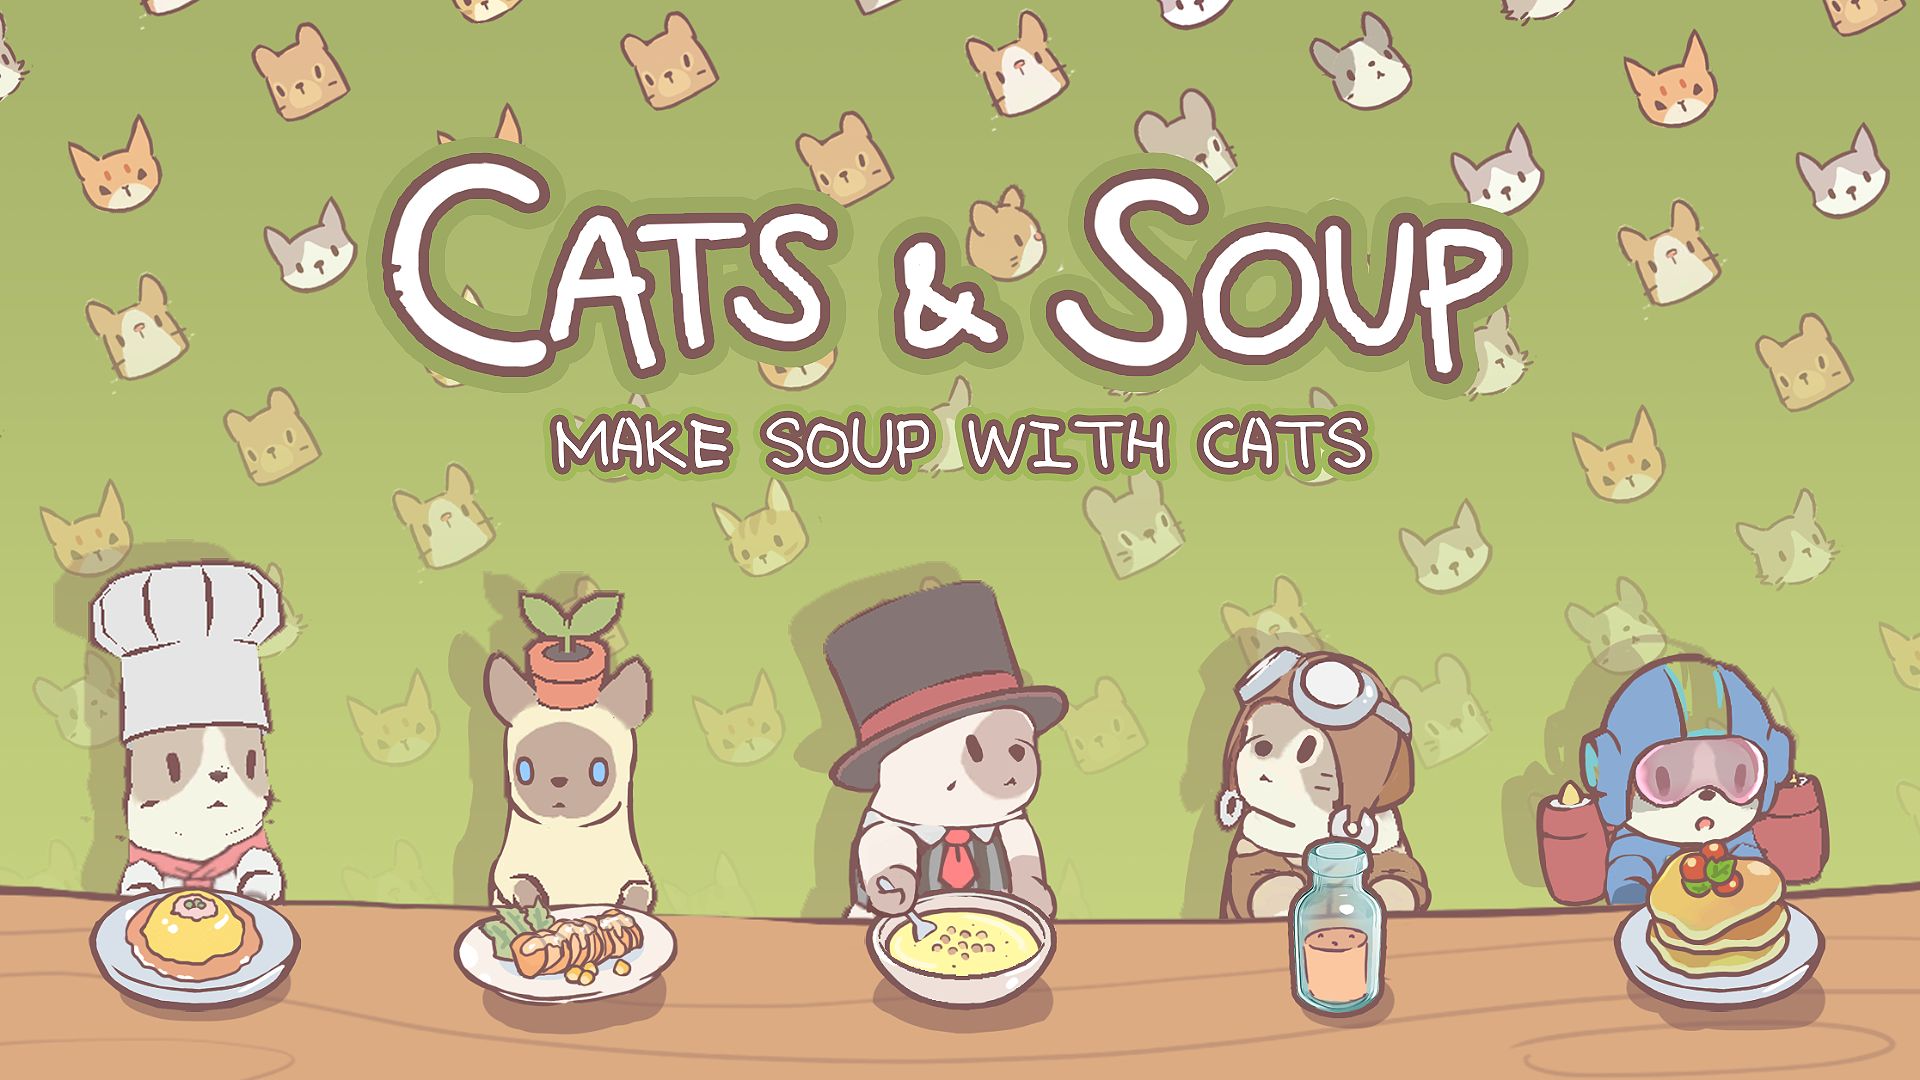 Scarica CATS & SOUP gratis per Android.